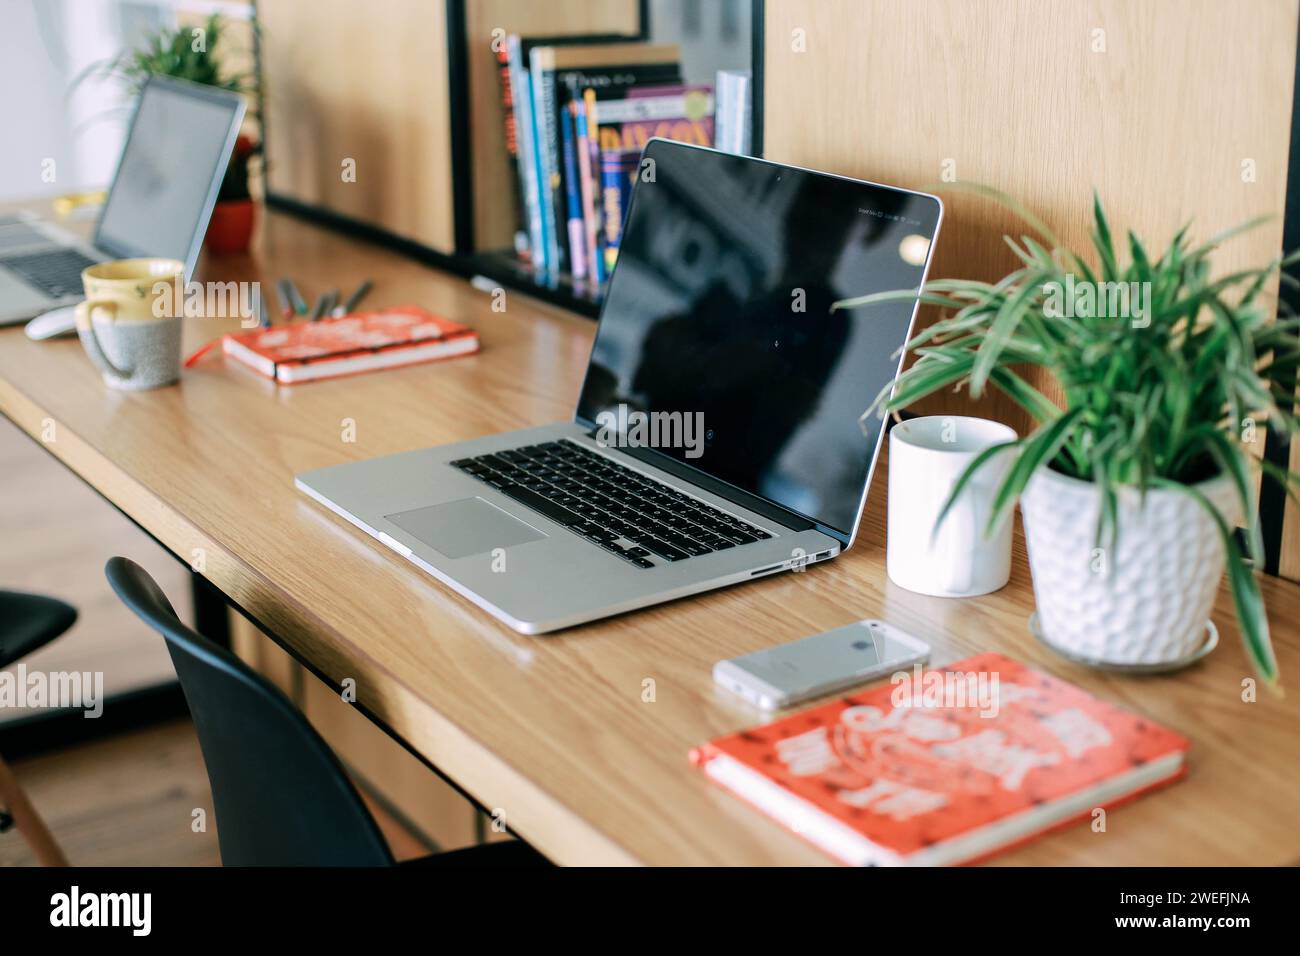 An image of two laptops side by side on a desk in front of a bookcase Stock Photo